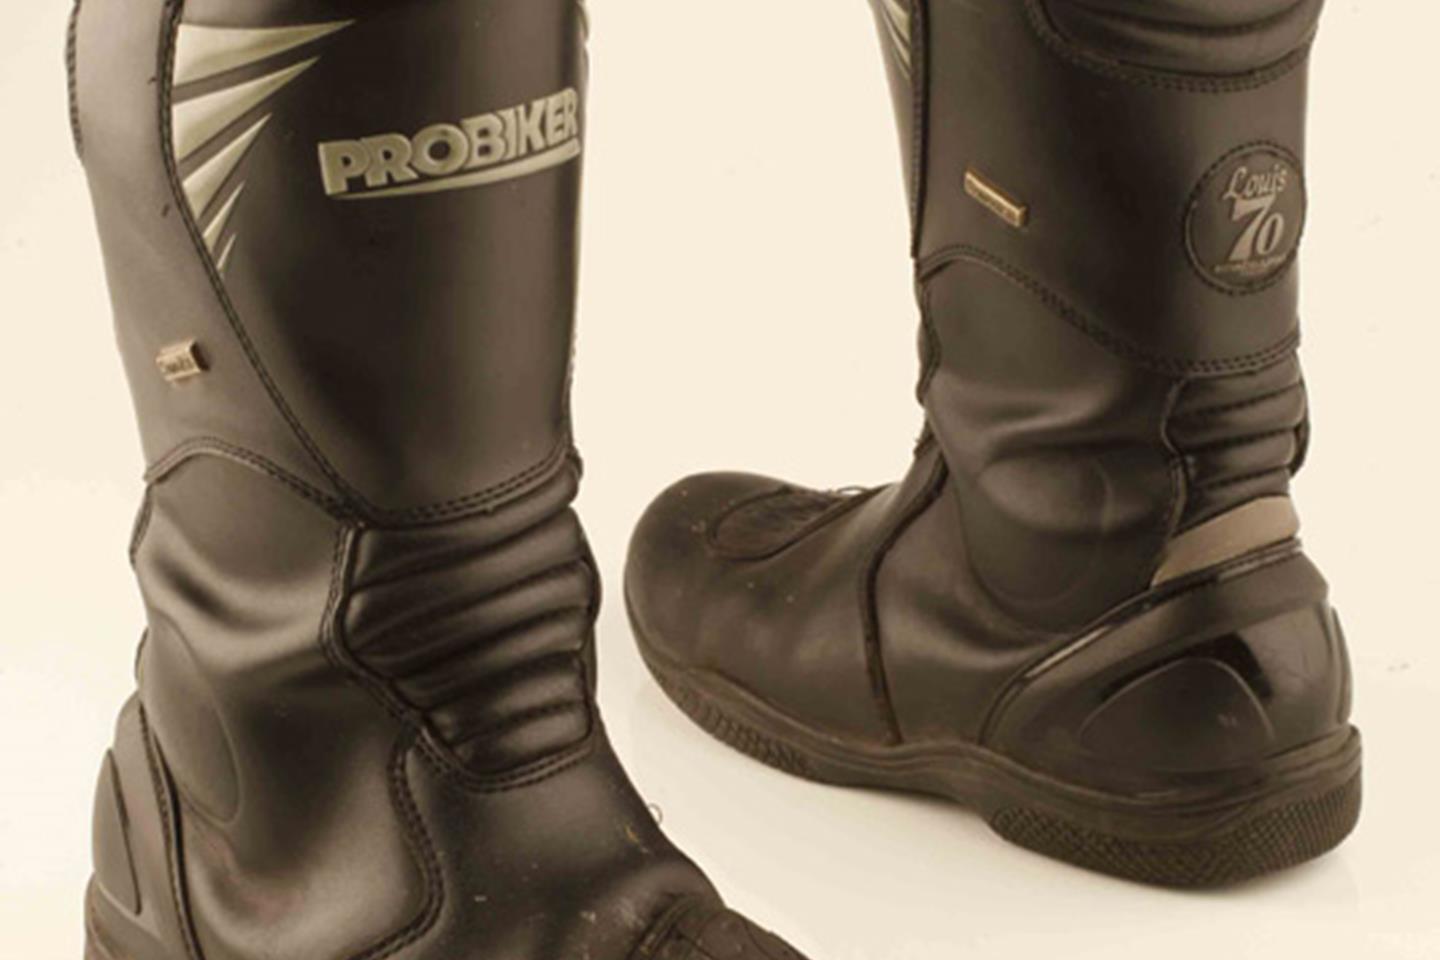 Boot review: Probiker 70 | MCN